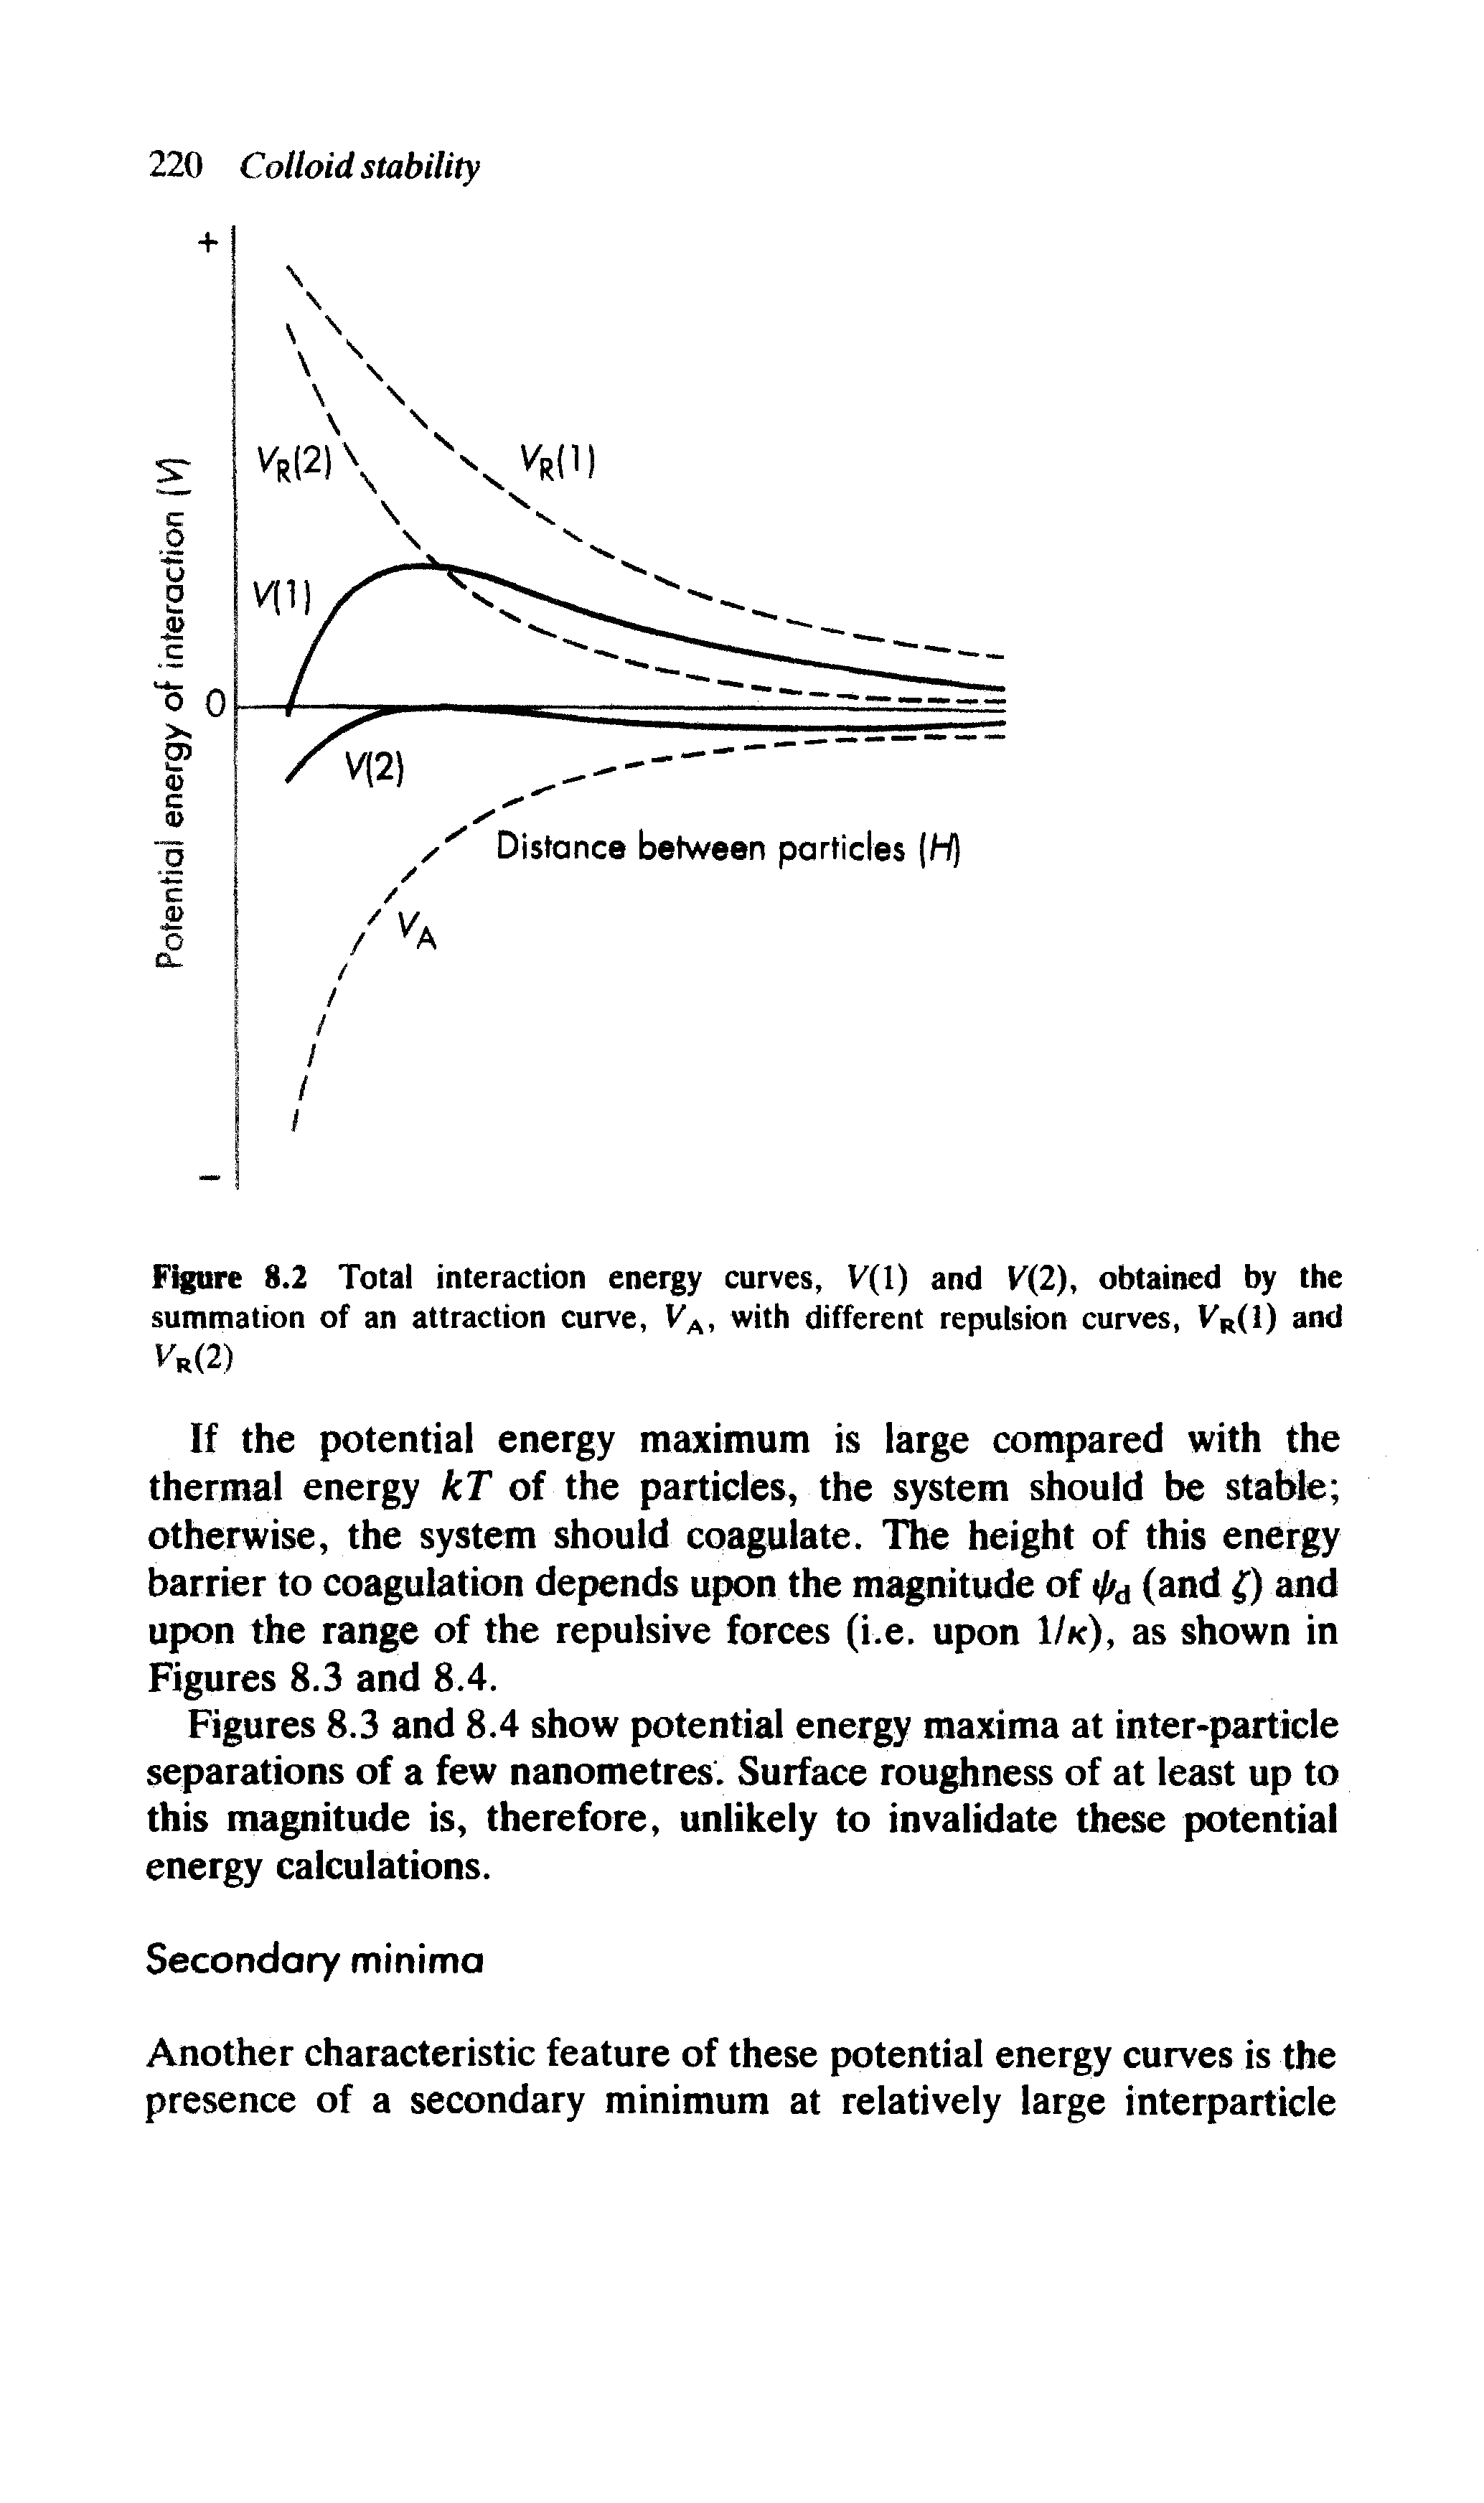 Figure 8.2 Total interaction energy curves, V(l) and V(2), obtained by the summation of an attraction curve, VA, with different repulsion curves, VR(1) and Vr(2)...